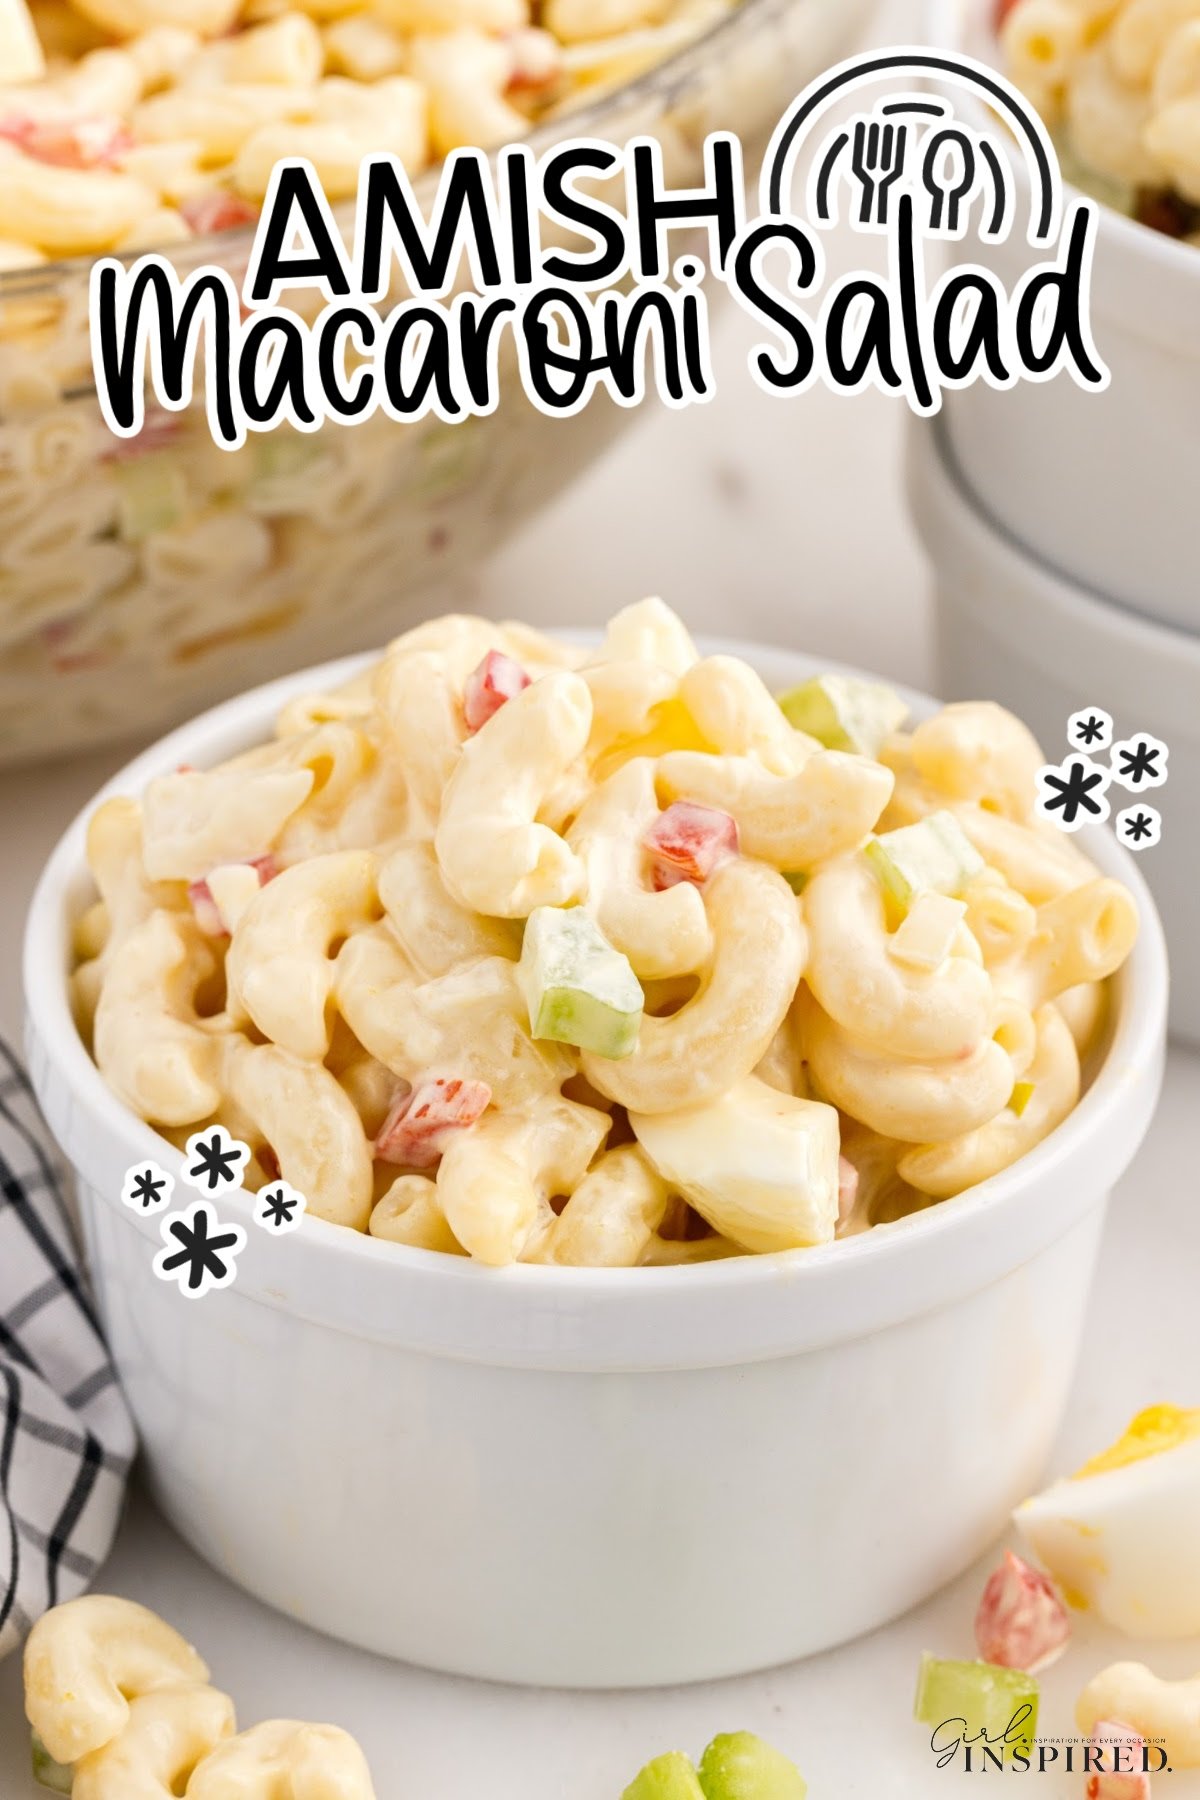 A small dish of Amish Macaroni Salad with text overlay.